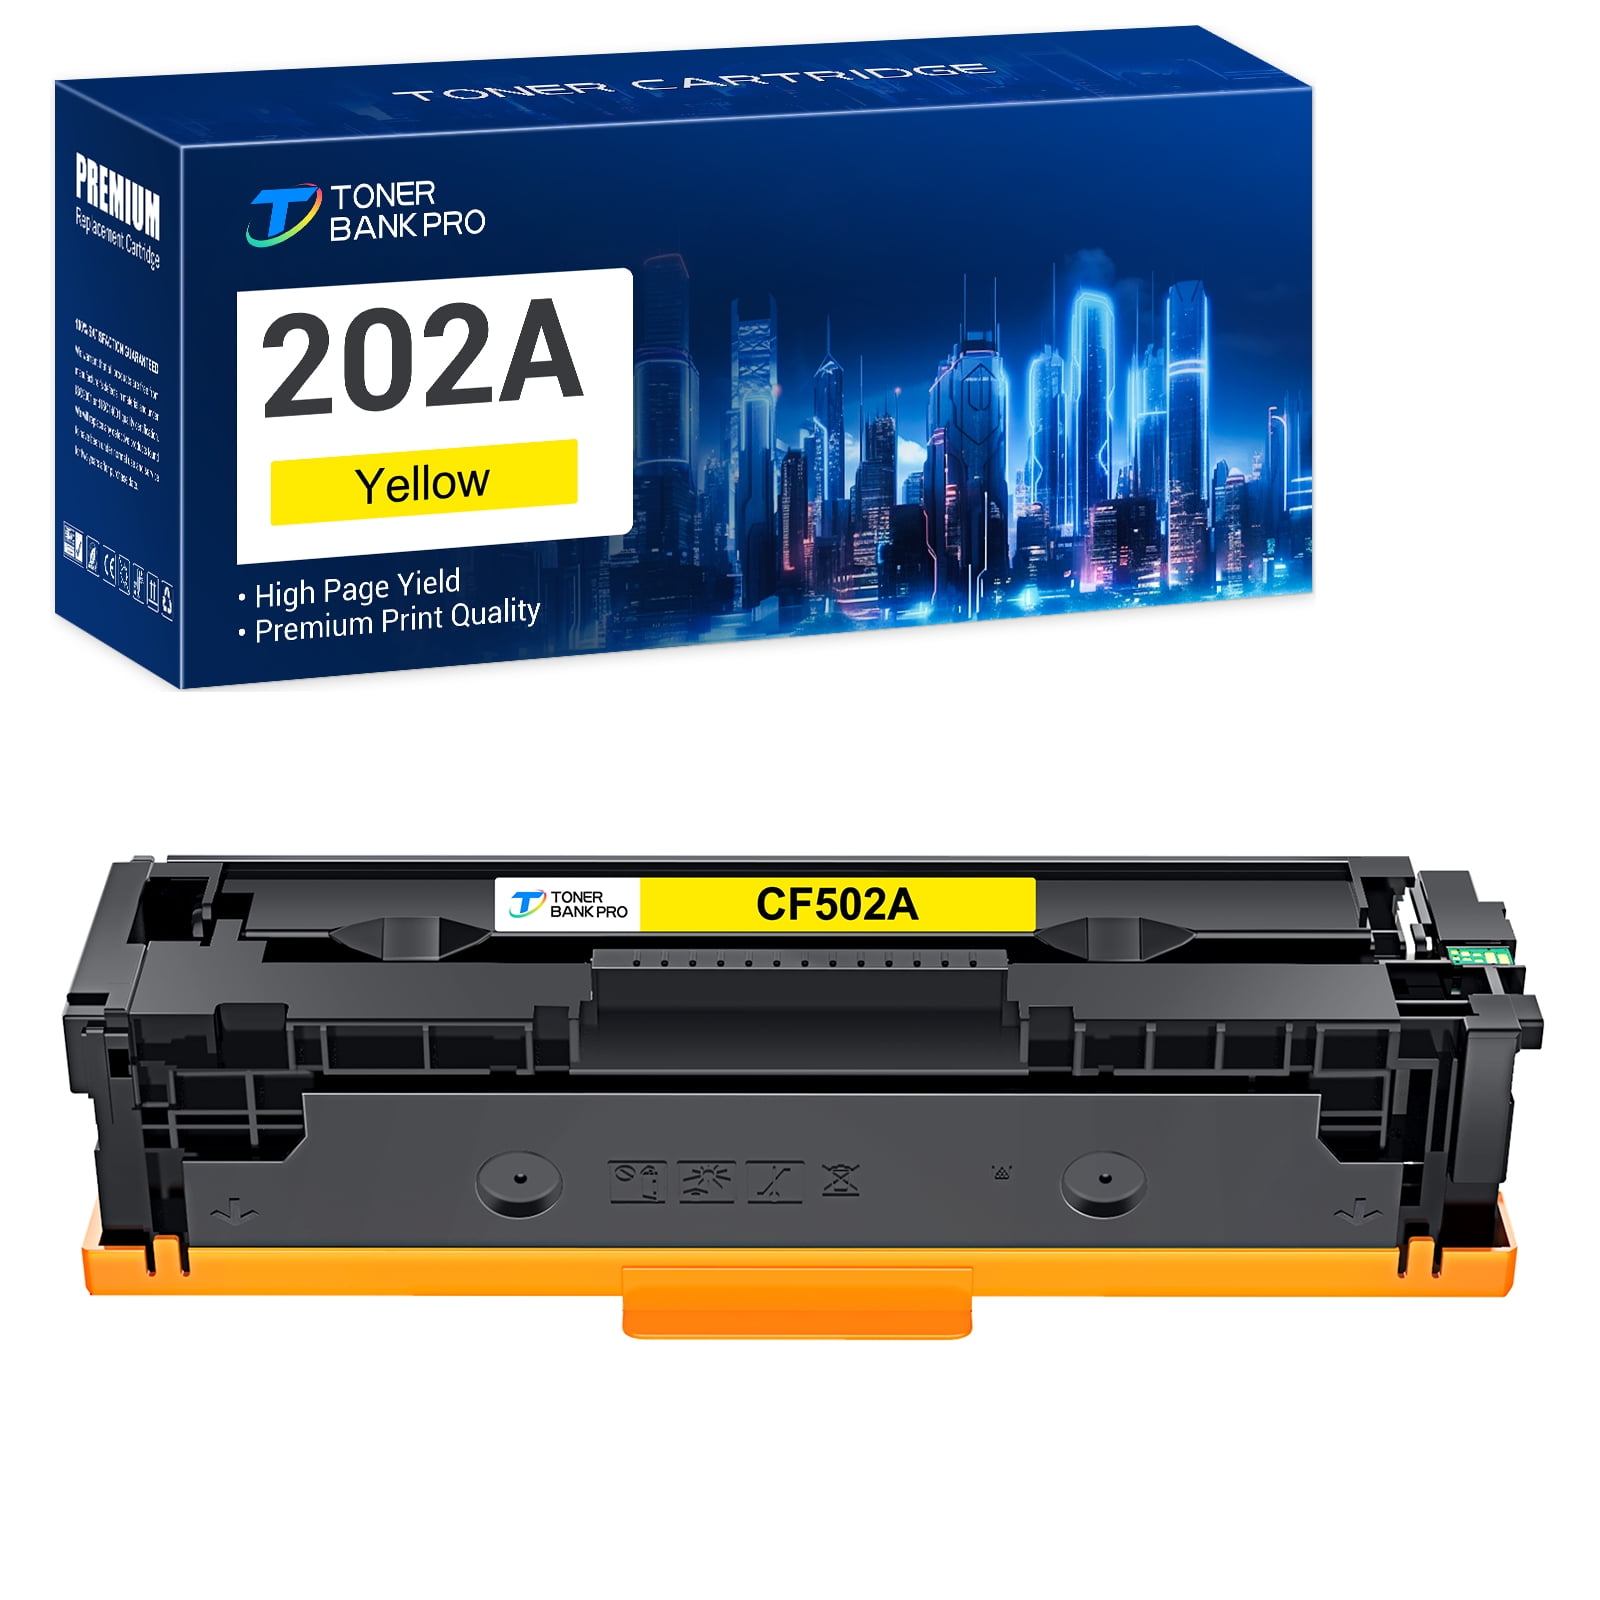 Toner Bank 1-Pack Compatible Toner Cartridge Replacement for HP CF502A 202A  Color LaserJet Pro M254dw M254dn M254nw Printer Toner Ink (Yellow)